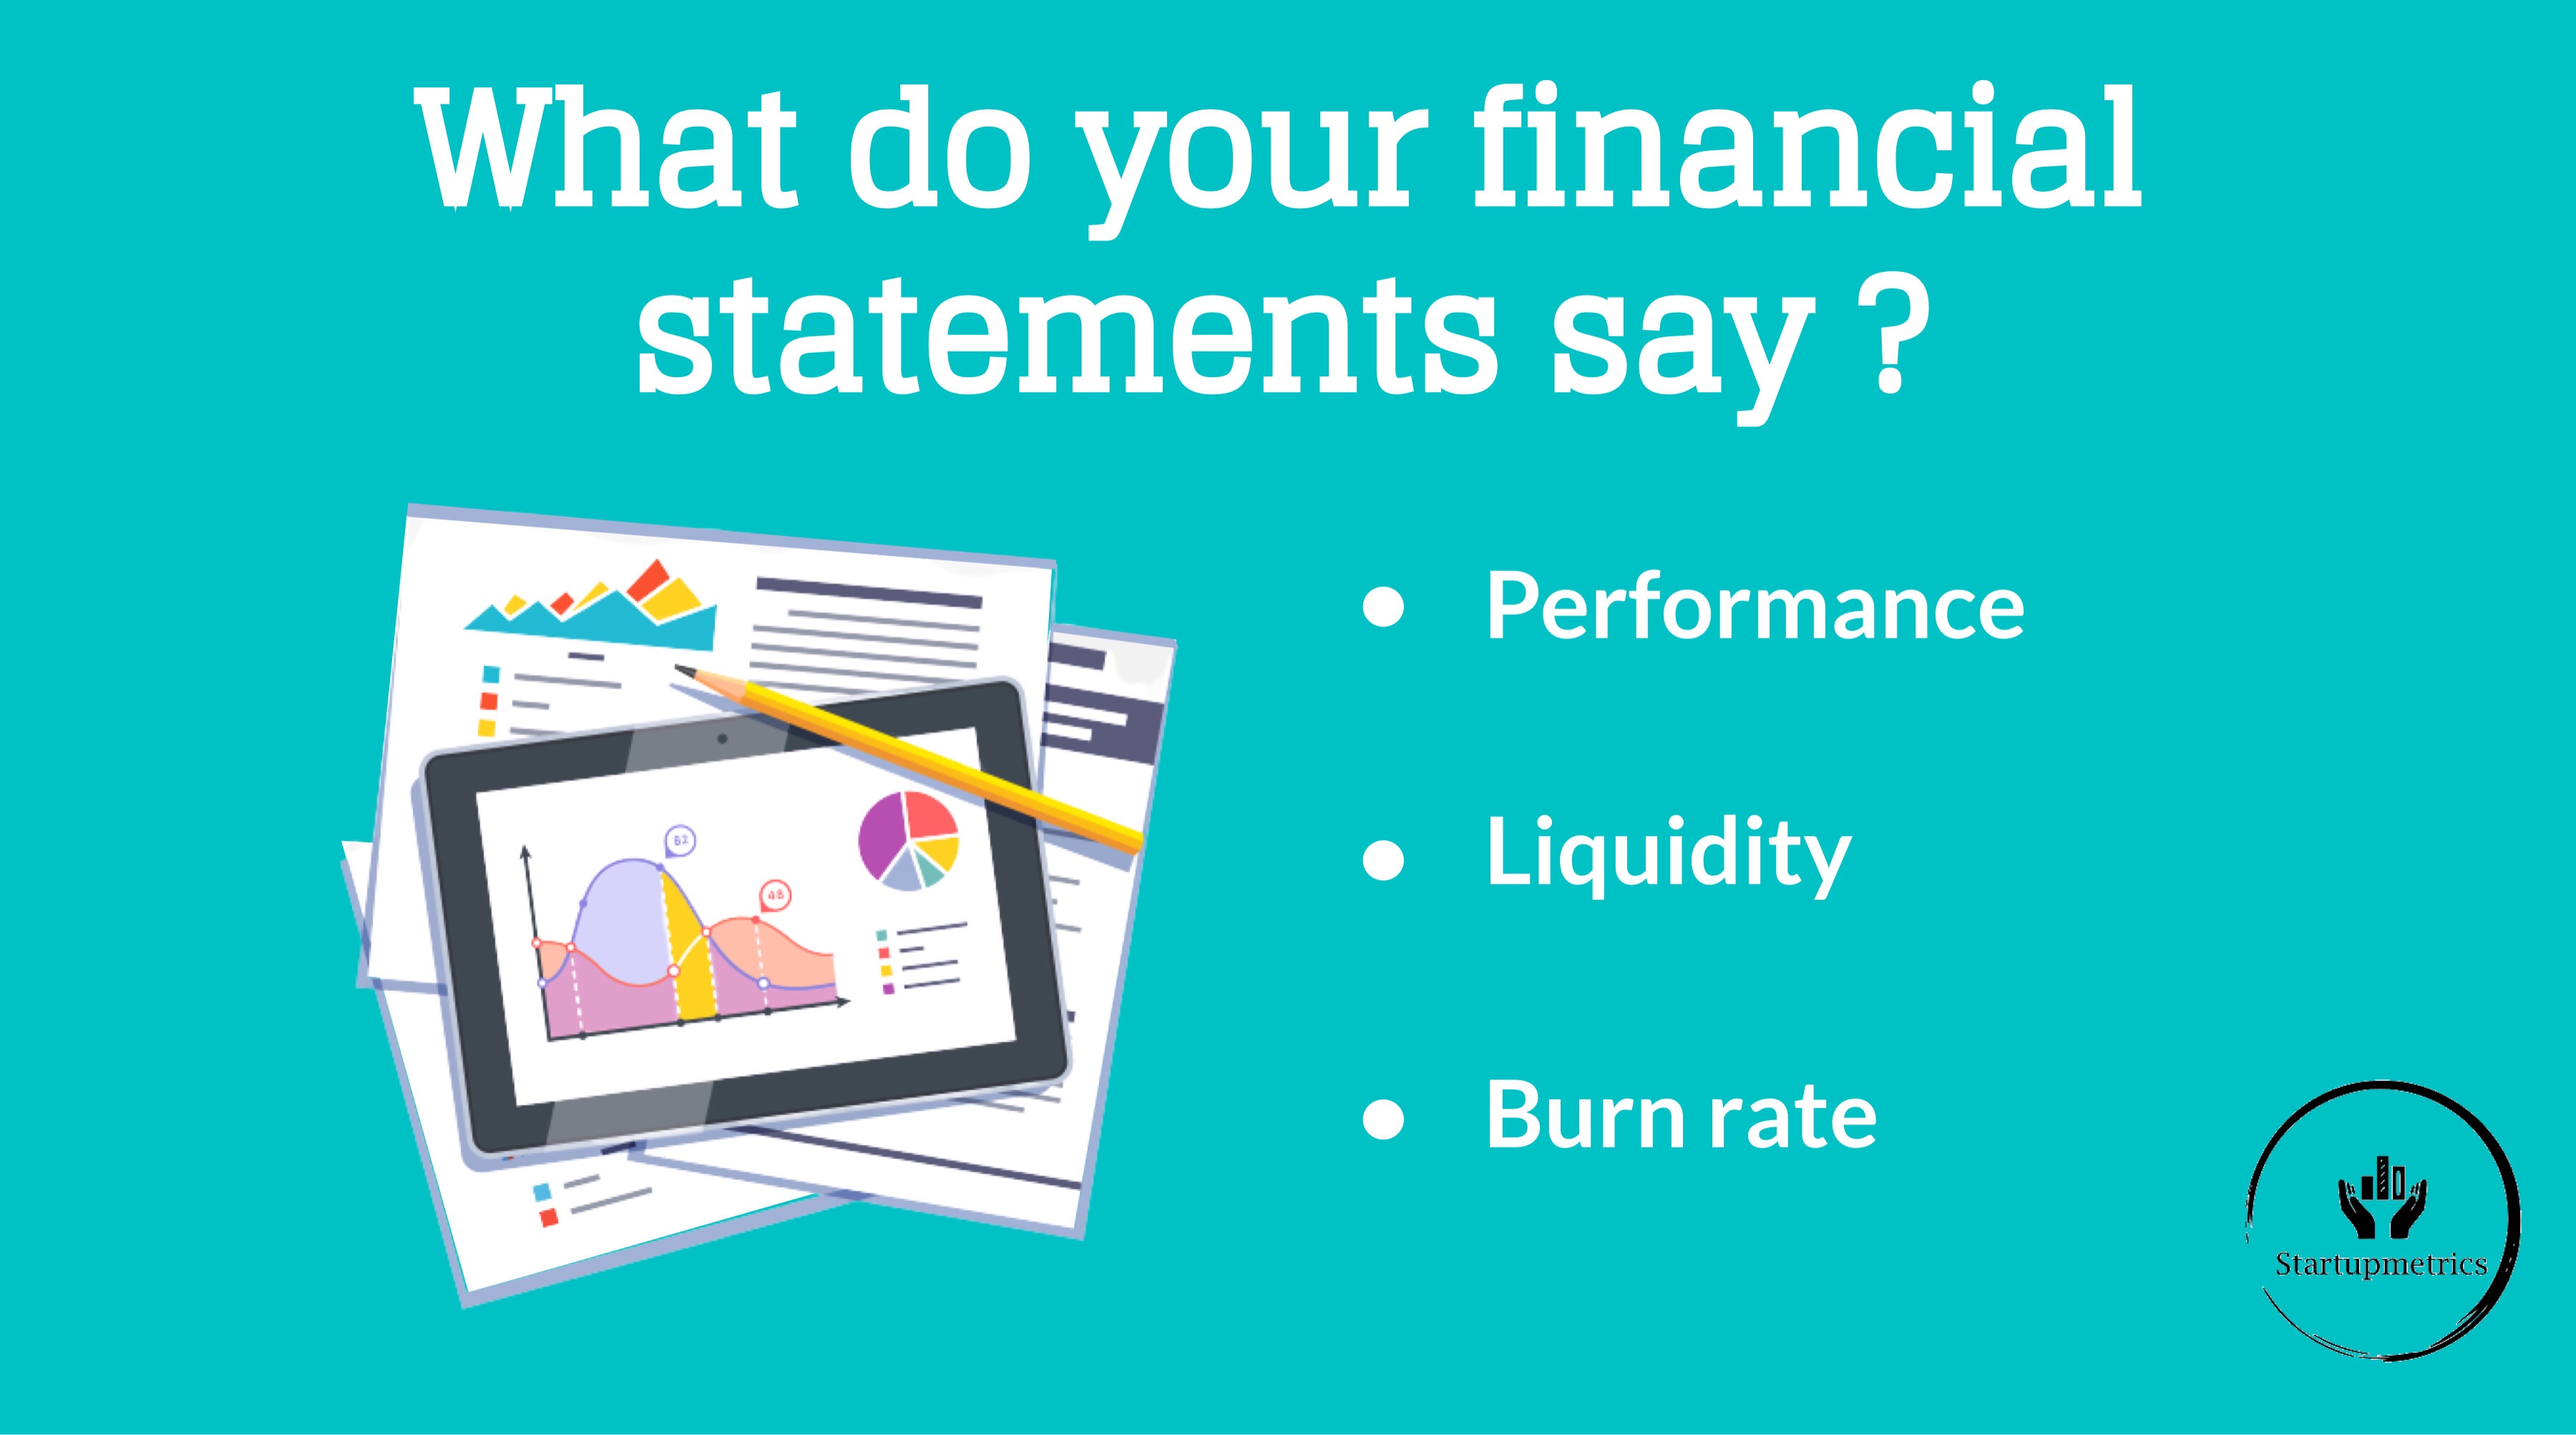 What do your financial statements say?